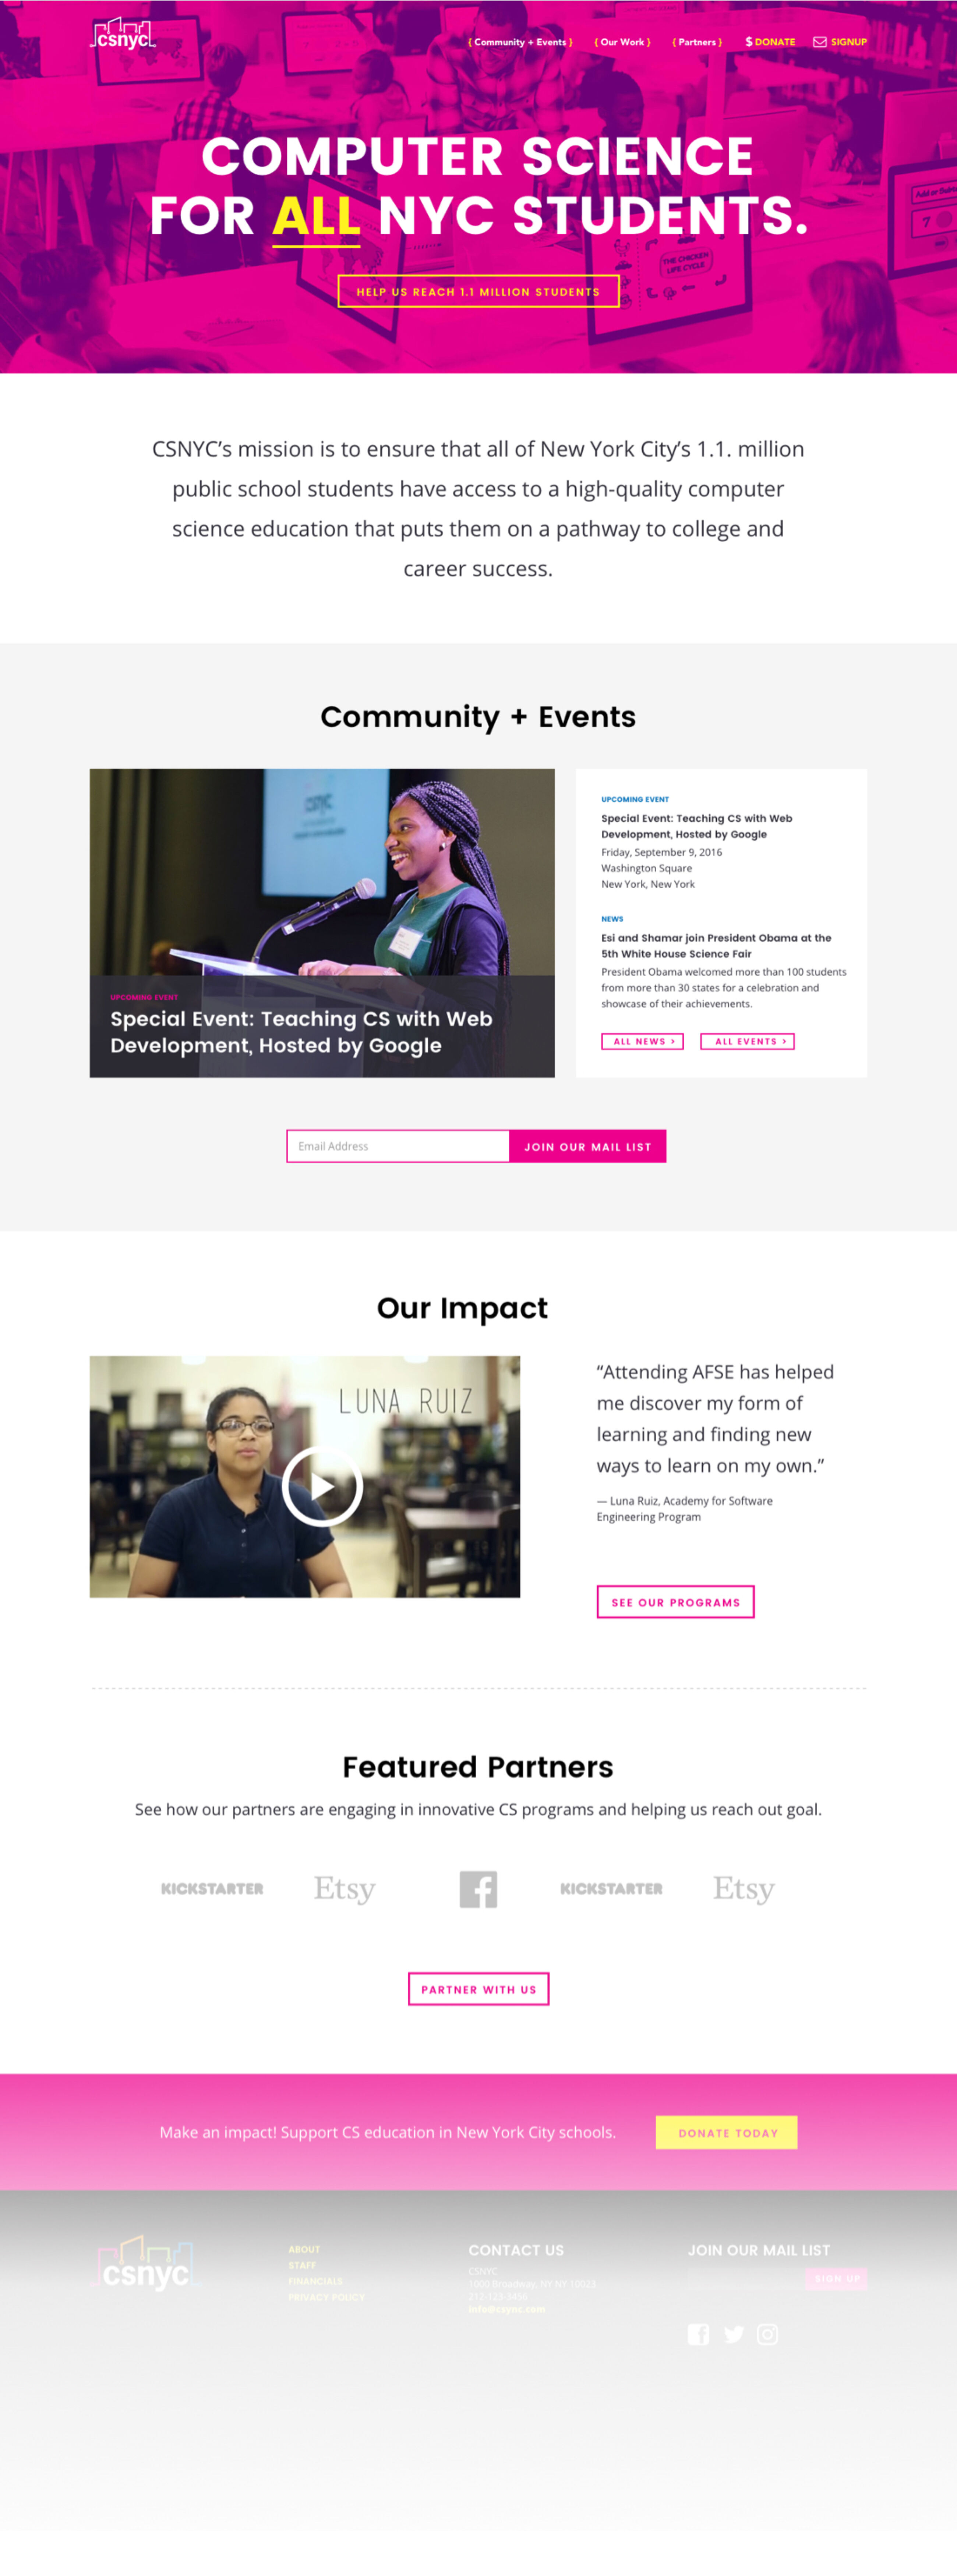 CSNYC website homepage showing mission, community and vents, impact and partners